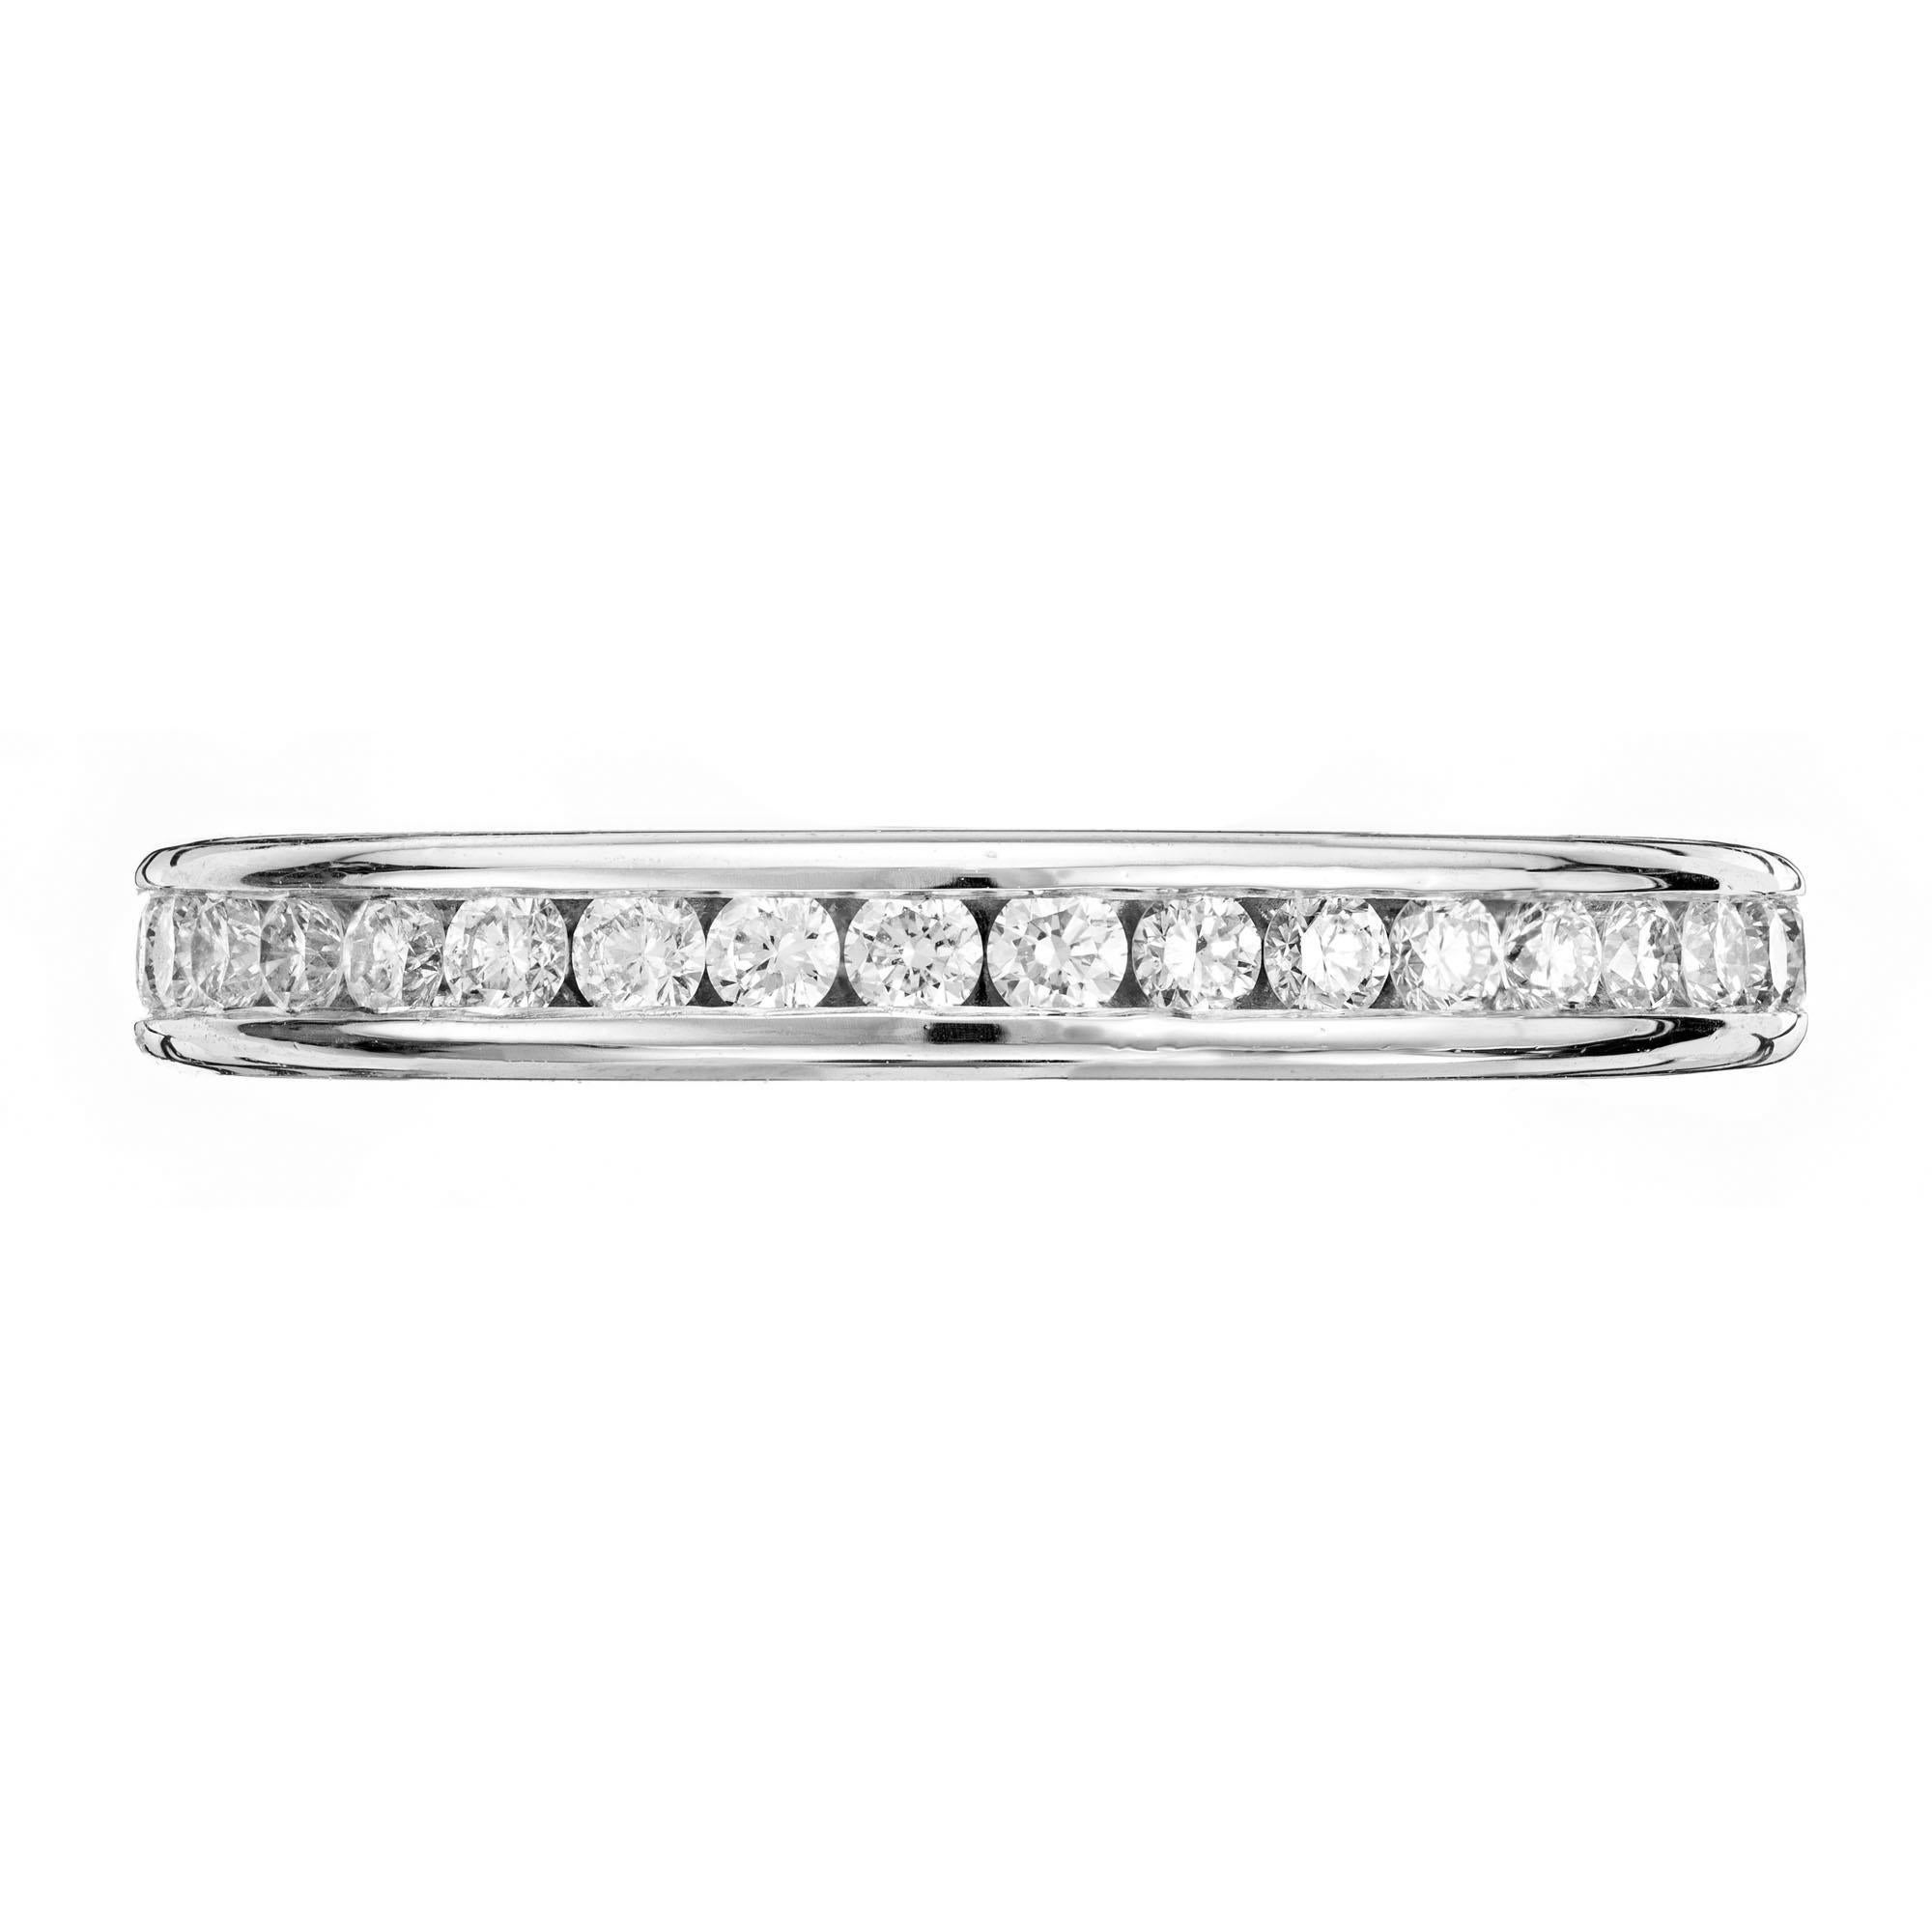 Channel set diamond wedding eternity band. 37 bright round brilliant cut diamonds. Can be custom ordered in different sizes. Designed and crafted in the Peter Suchy workshop

37 round brilliant cut diamonds, VS approx. .74cts
Size 7.5 and not